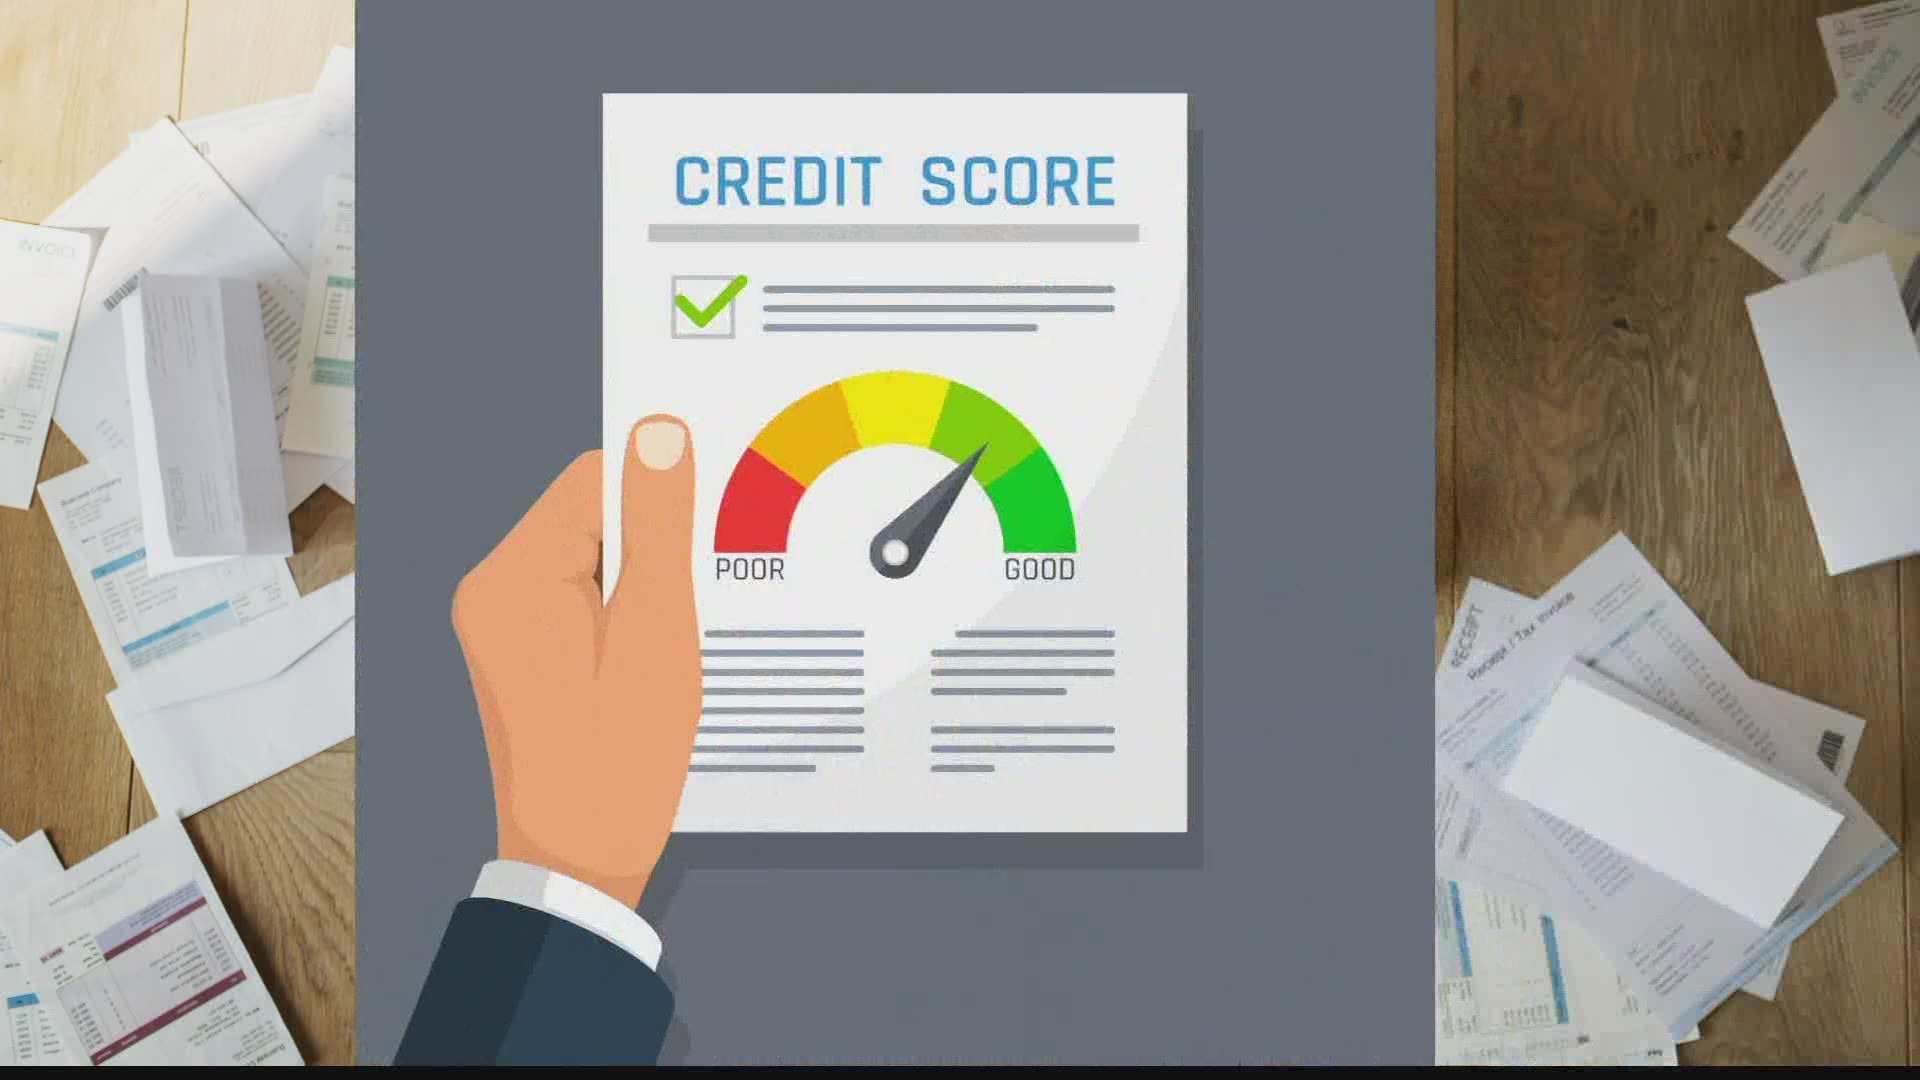 Your credit report doesn’t show if you apply for unemployment benefits or your employment history, our Verify experts say.